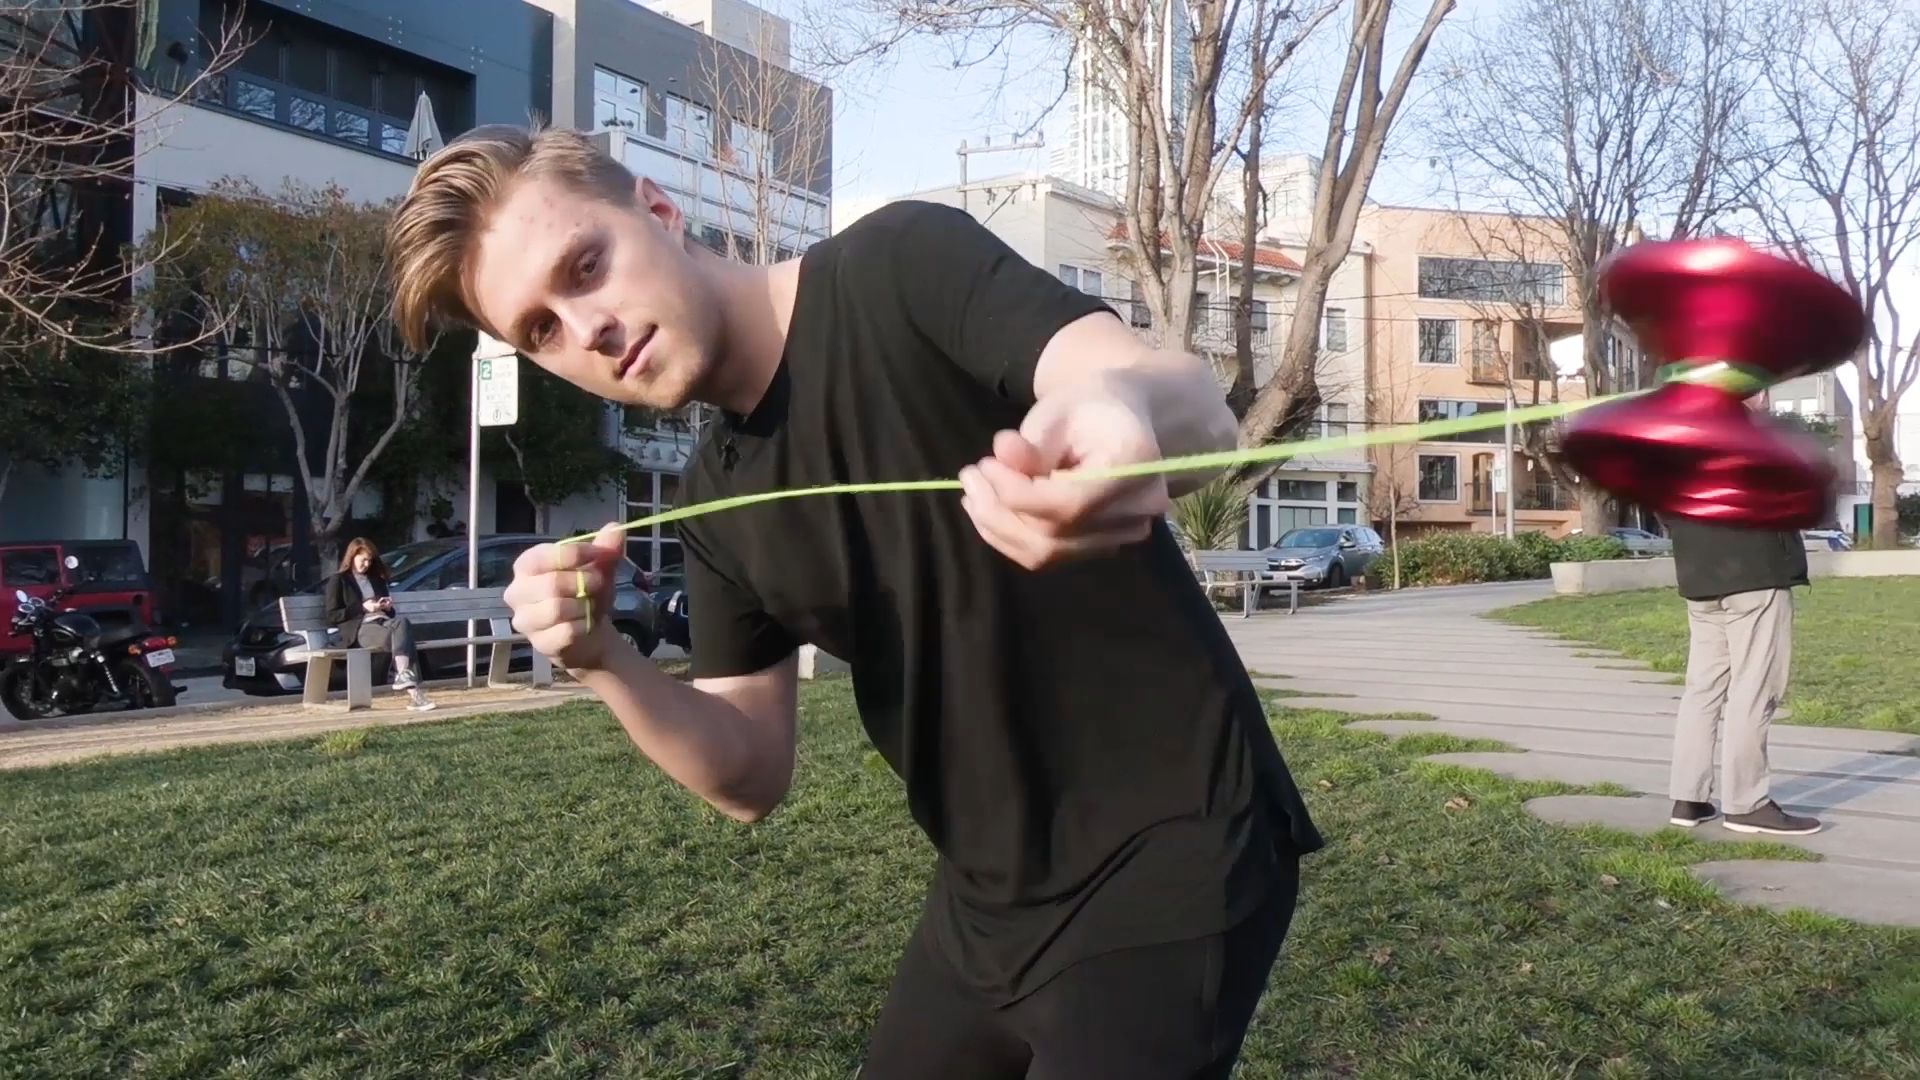 Watch How This Guy Became a World Yo-Yo Champion, Obsessed